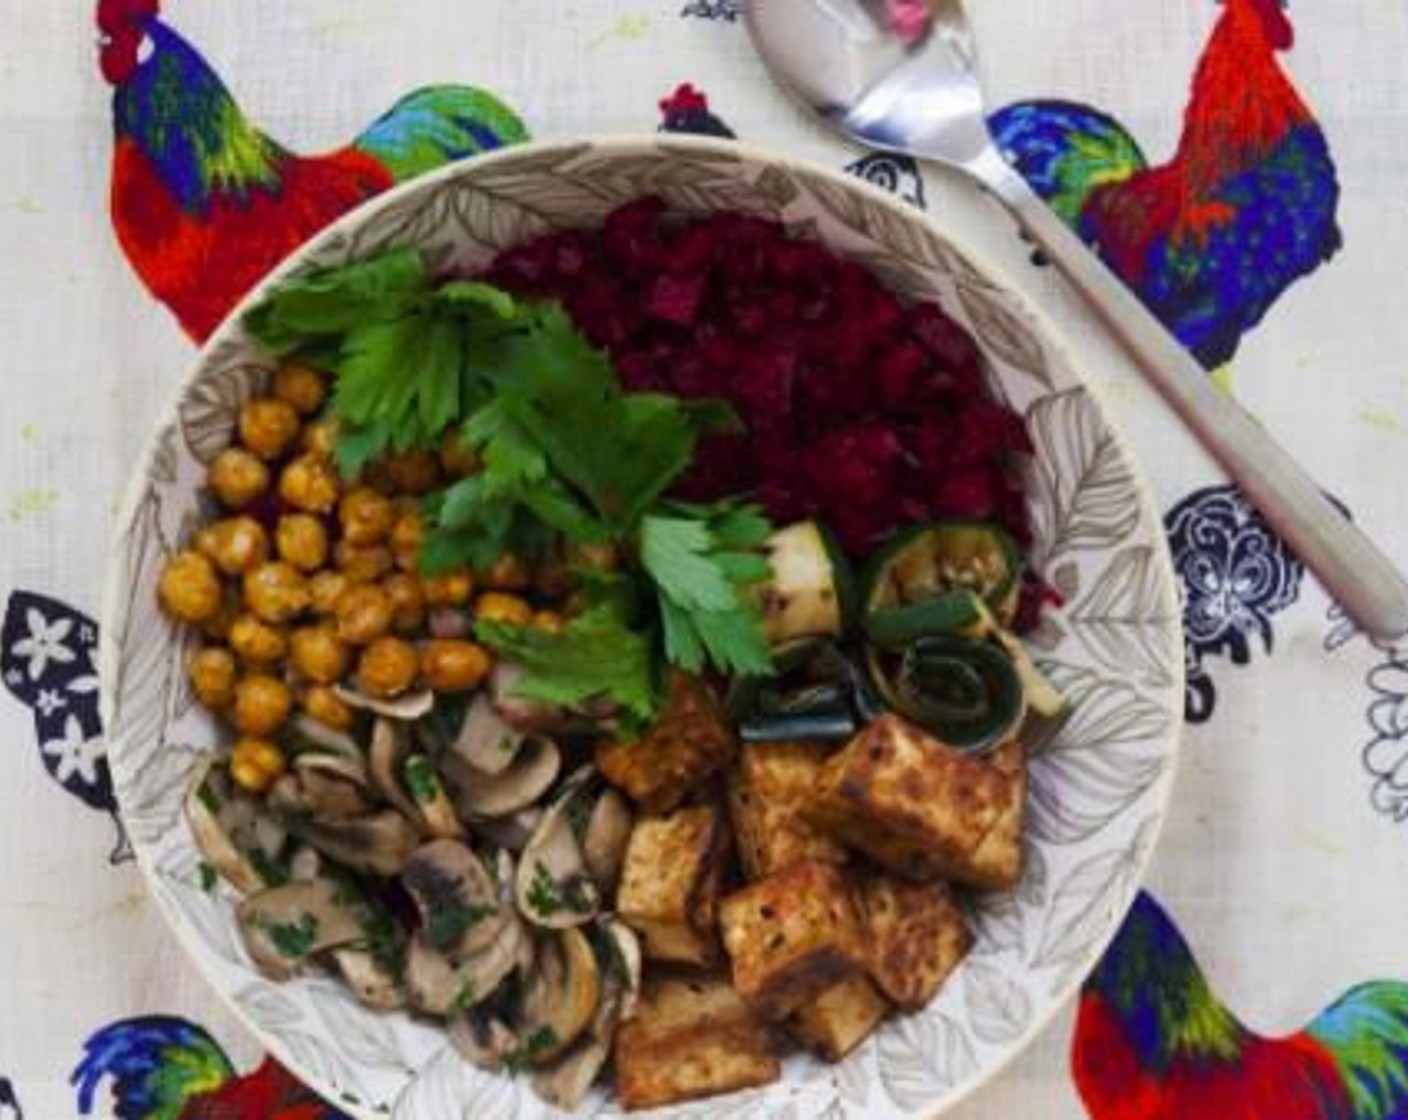 step 10 To assemble your Buddha bowl, lay the beet at the bottom of a bowl, top with mushrooms, tofu, grilled zucchini, roasted chickpeas and dress with a drizzle of extra virgin olive oil.